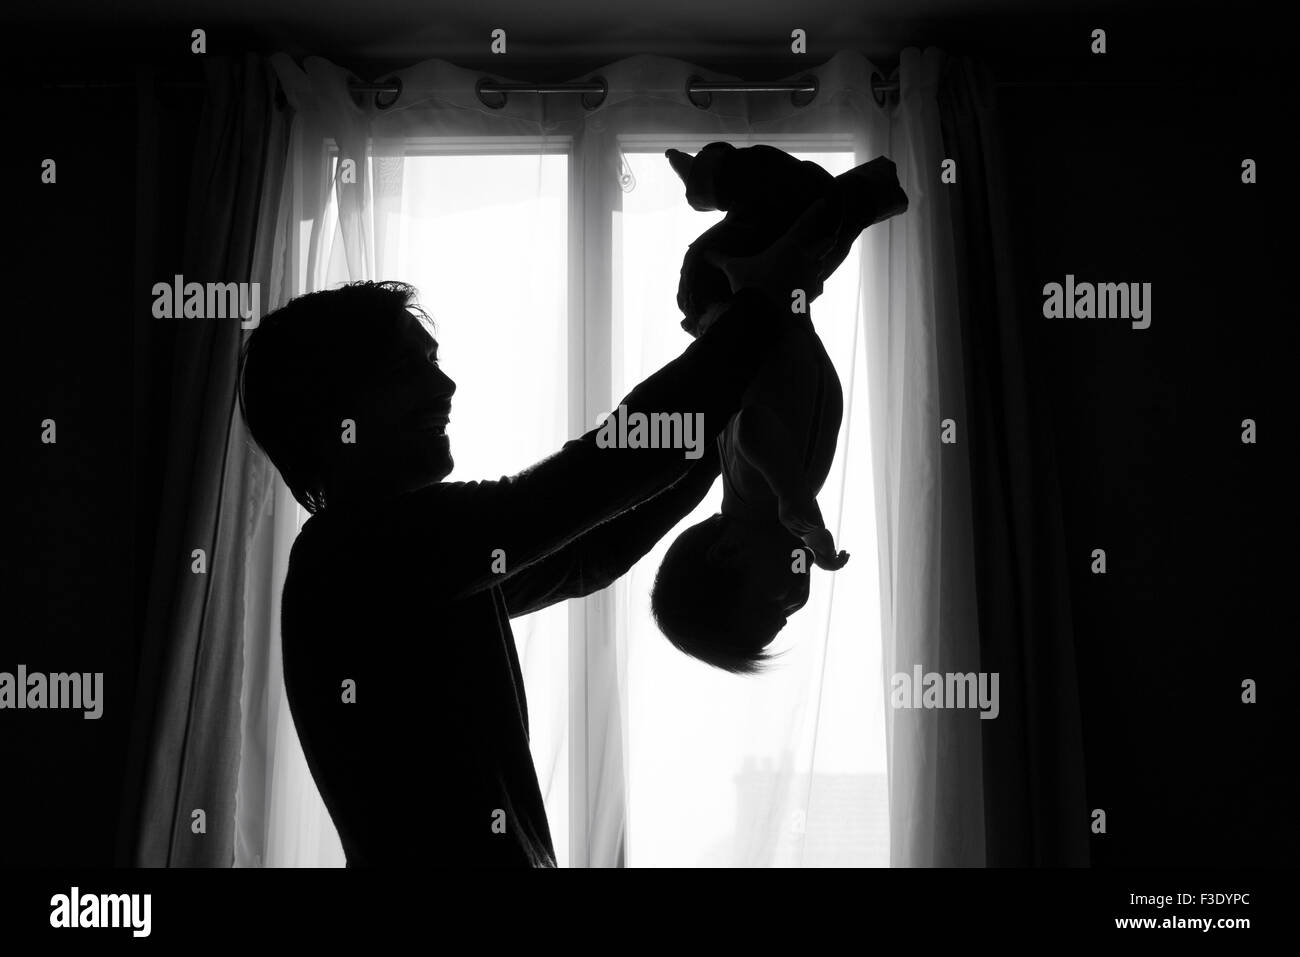 Father holding baby upside down Stock Photo